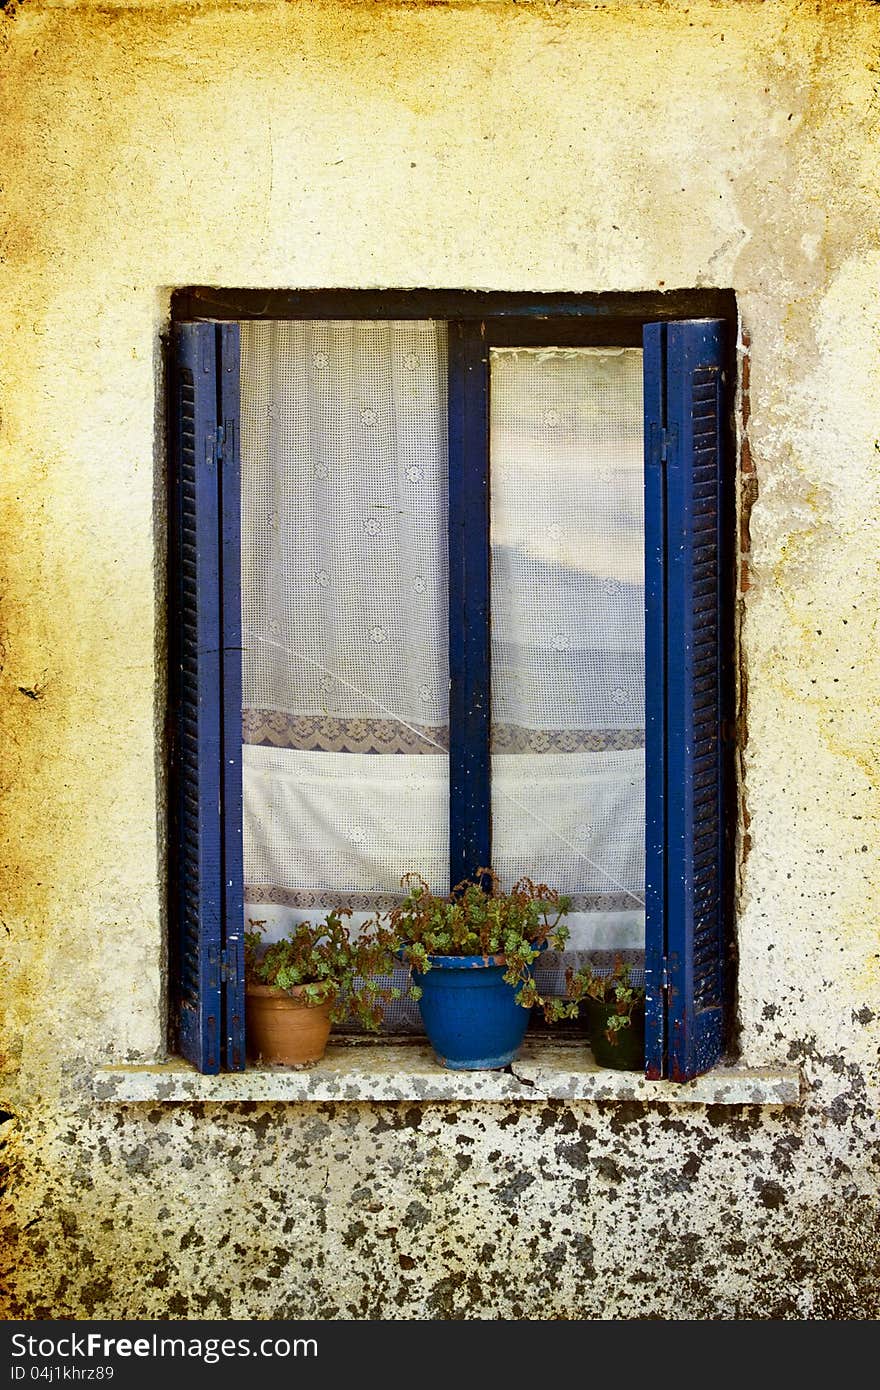 Decorative vintage window with colorful plants in pots. Decorative vintage window with colorful plants in pots